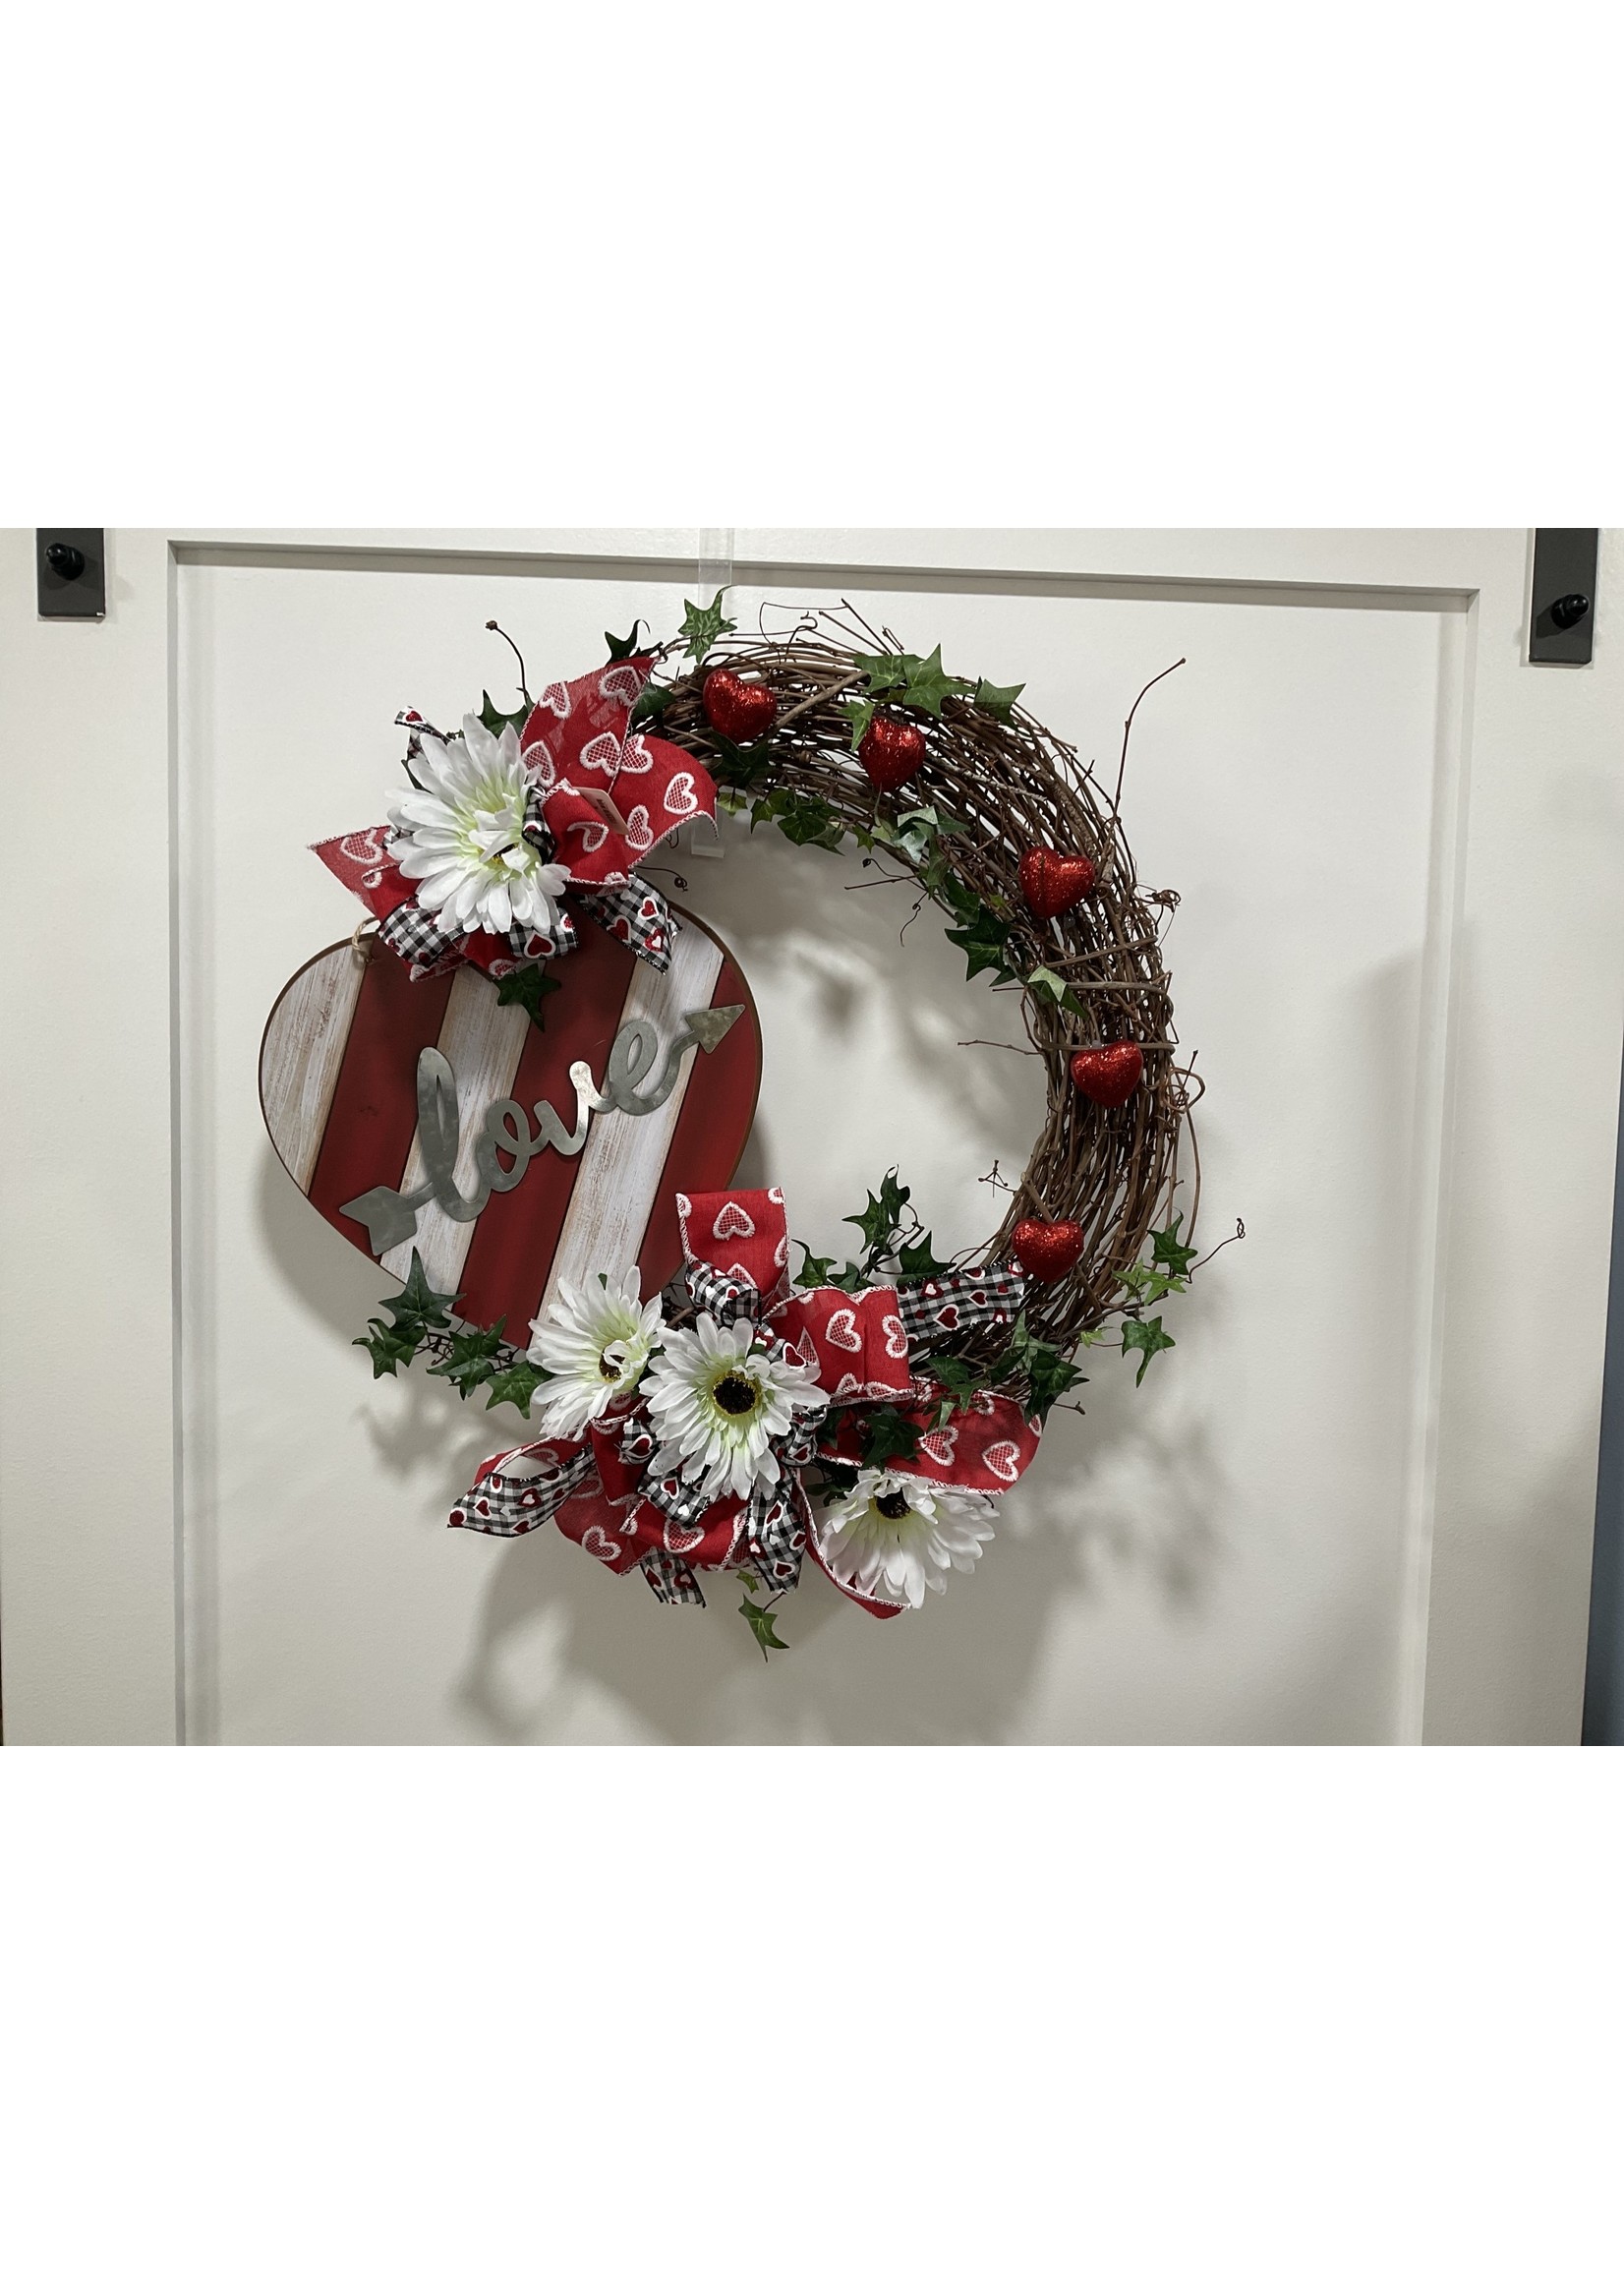 My New Favorite Thing Wreath Grapevine "Love" with White Flowers and Red Heart Ribbon